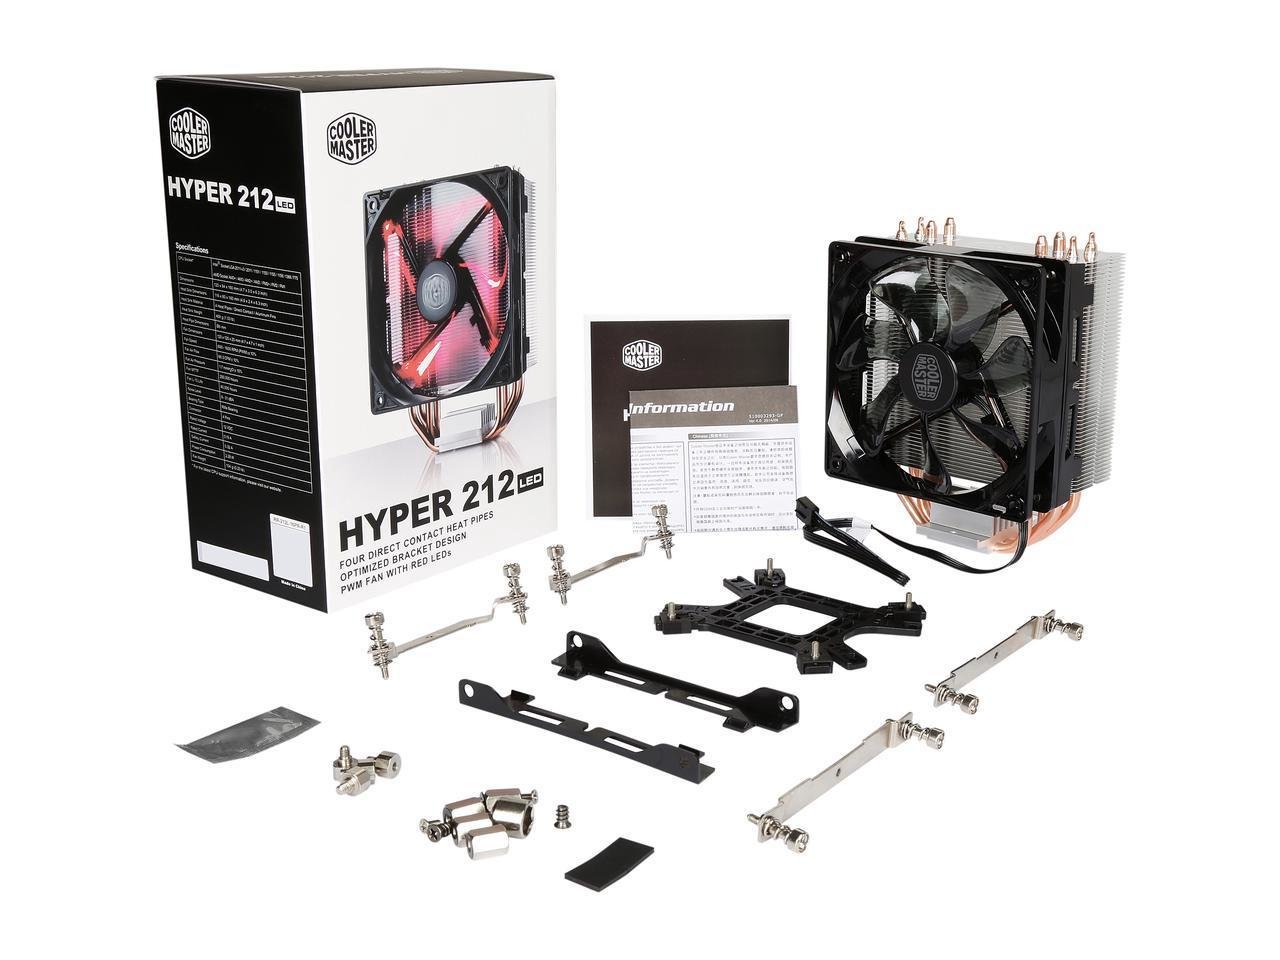 Hyper 212 LED with PWM Fan, Four Direct Contact Heatpipes, Unique Fan Blade Design, Red LEDs, Optimized Bracket Design by Cooler Master